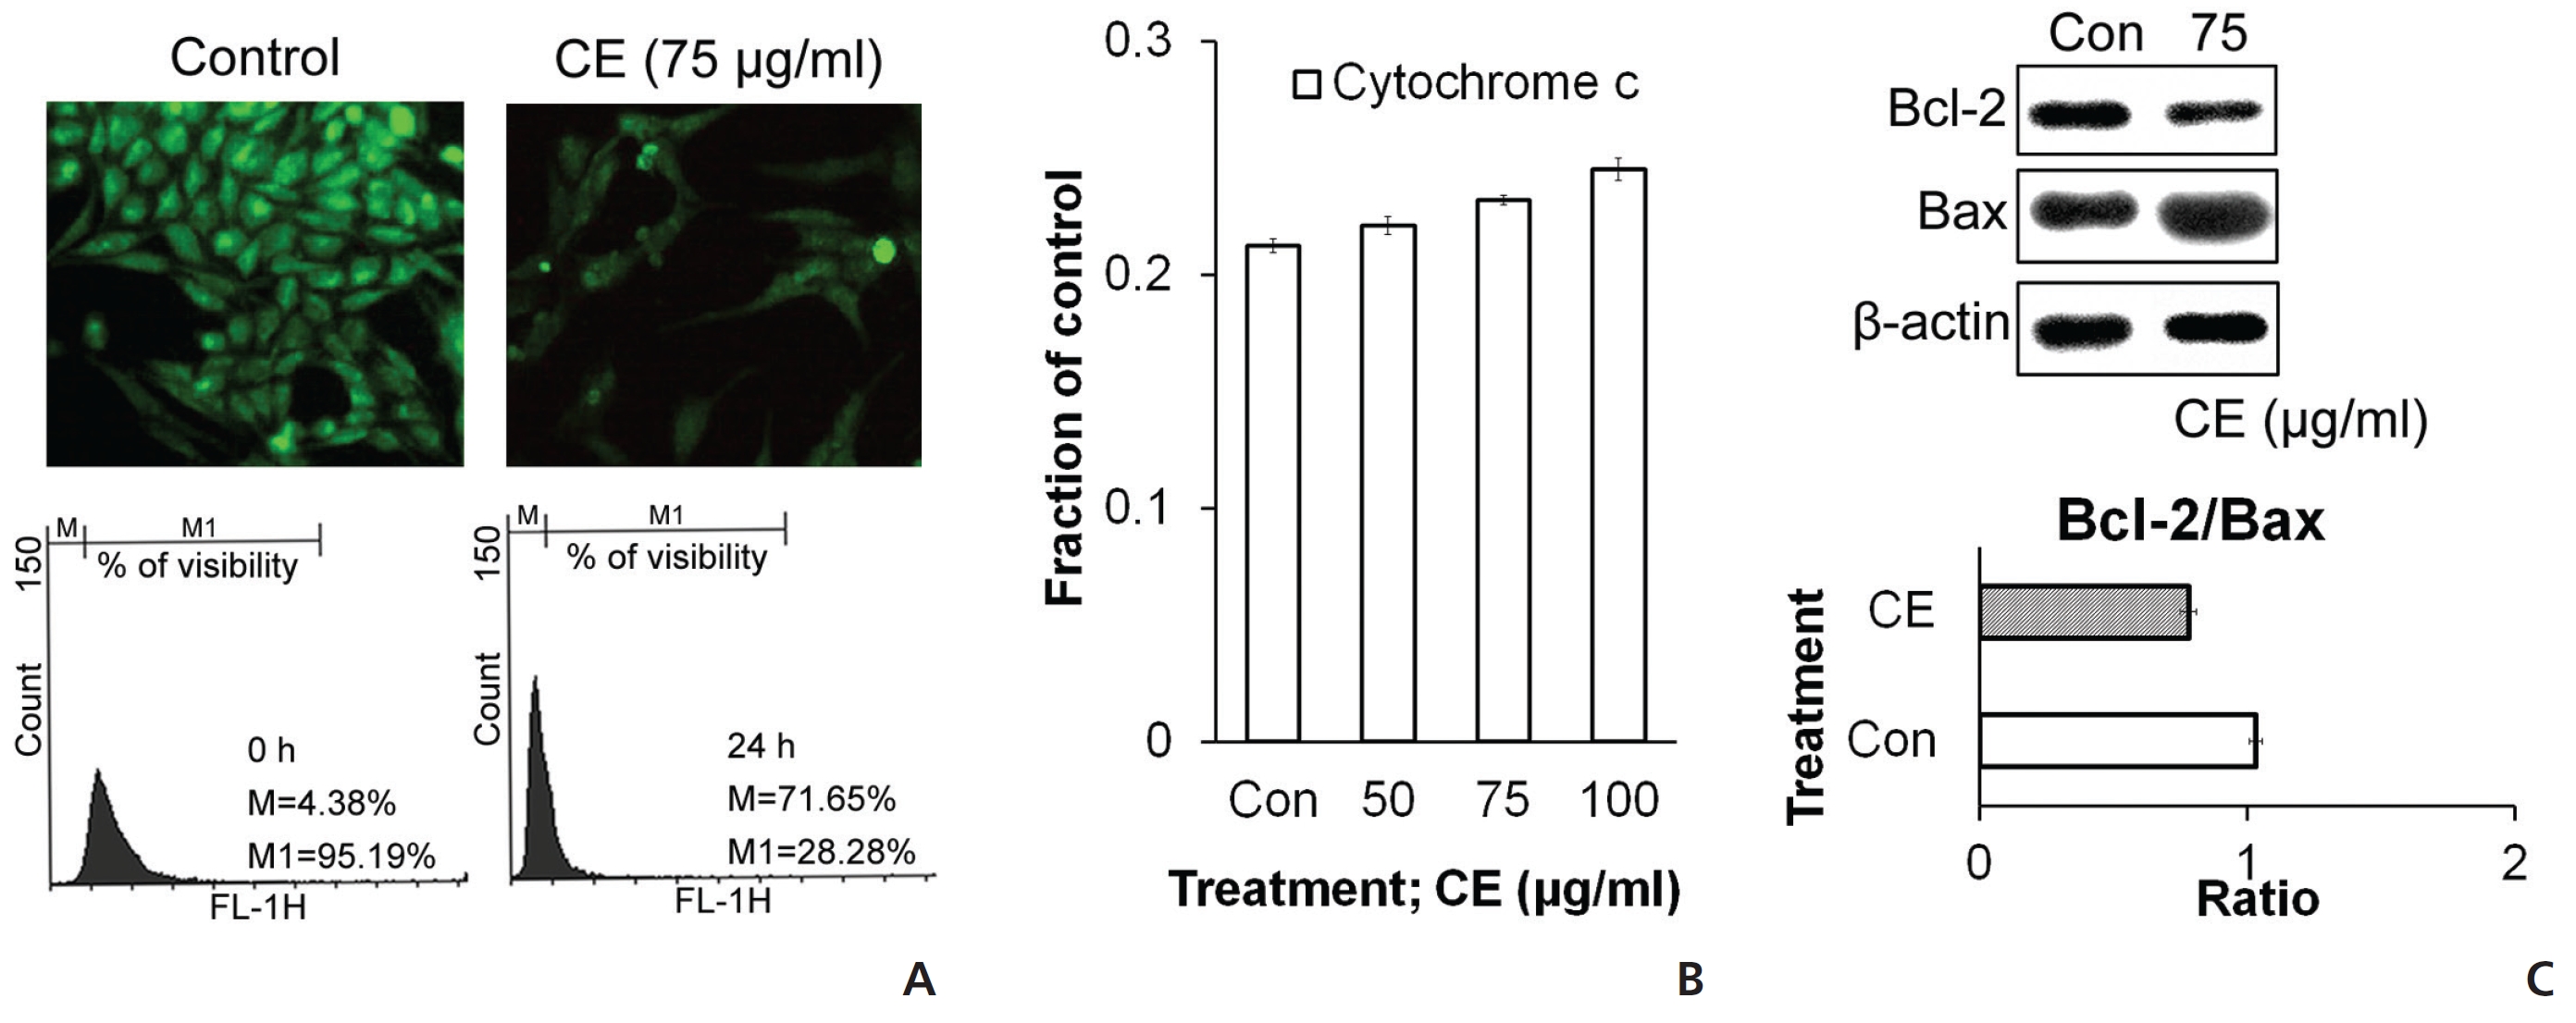 (A) For Rrhodamine staining: cells were fixed after treatment and were analyzsed after staining with rhodamine 123 by using a flow cytometer and a microscope. (B) Cytochrome c was analyzed by using the ELISA method. (C) The expressions of Bax and Bcl-2 were analyzed by using Western blotting, and their ratios are presented in a bar diagram.